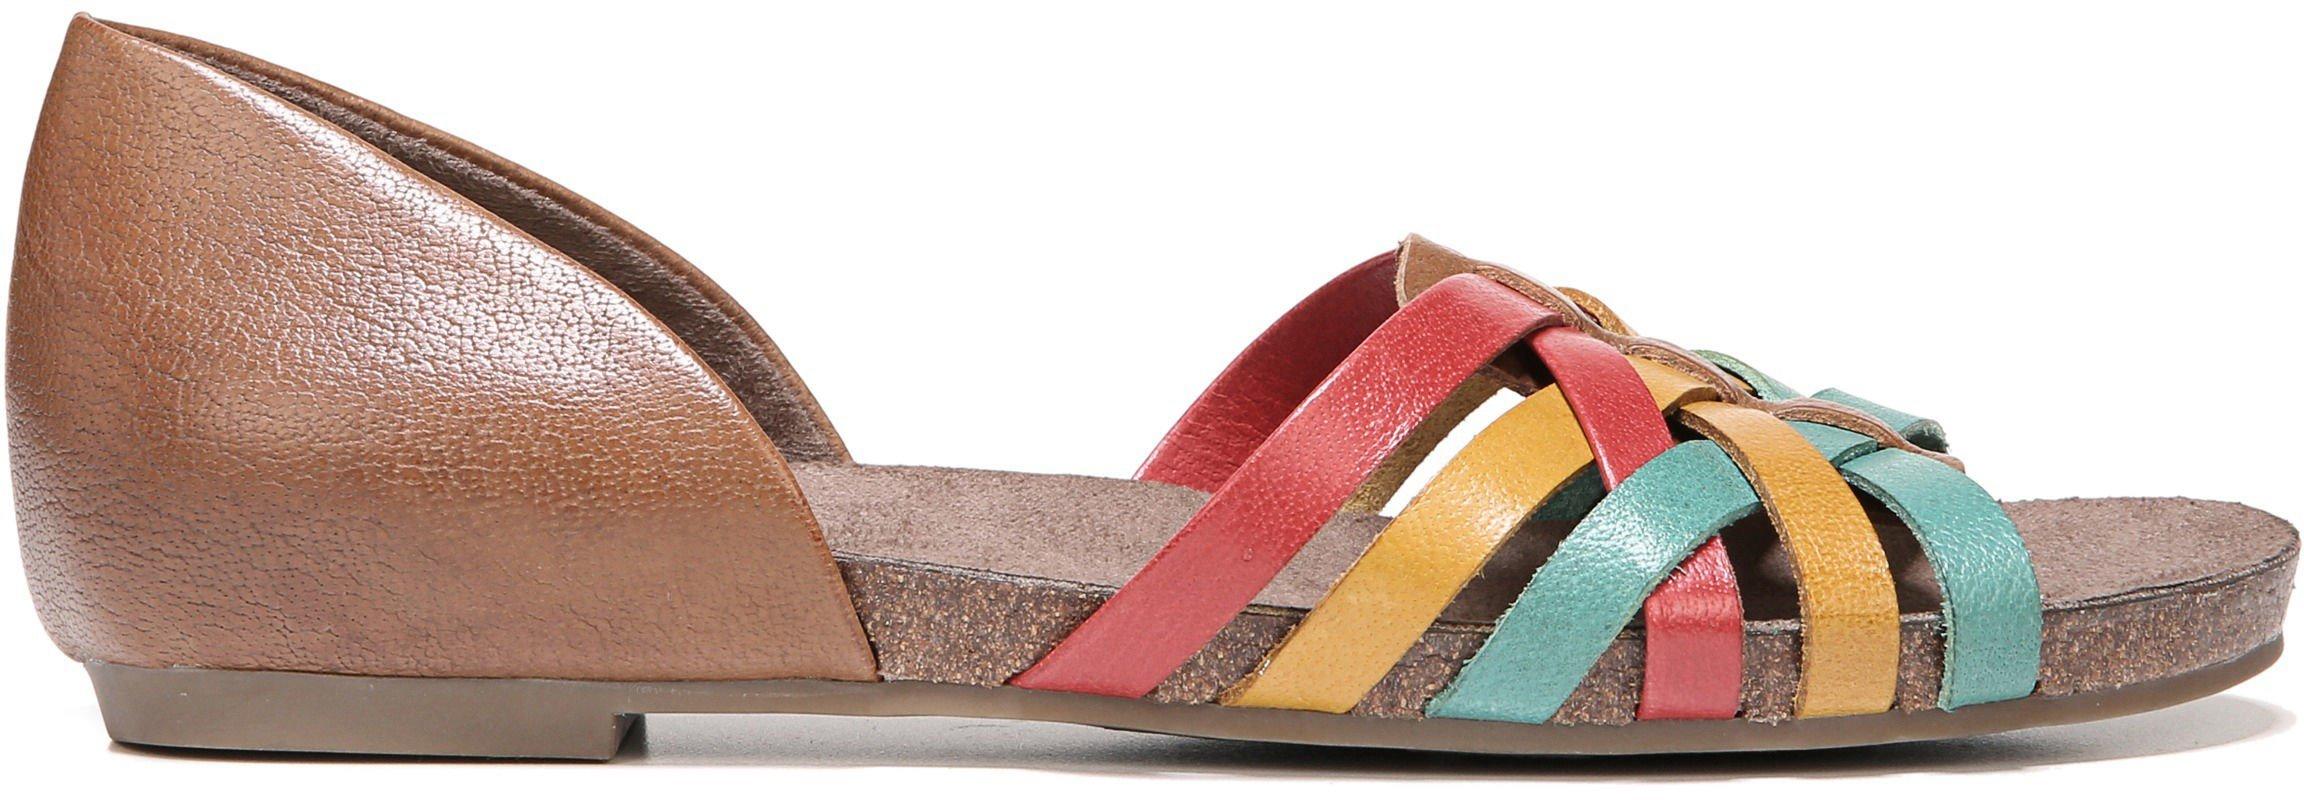 Womens Macomb Multi Strappy Sandals